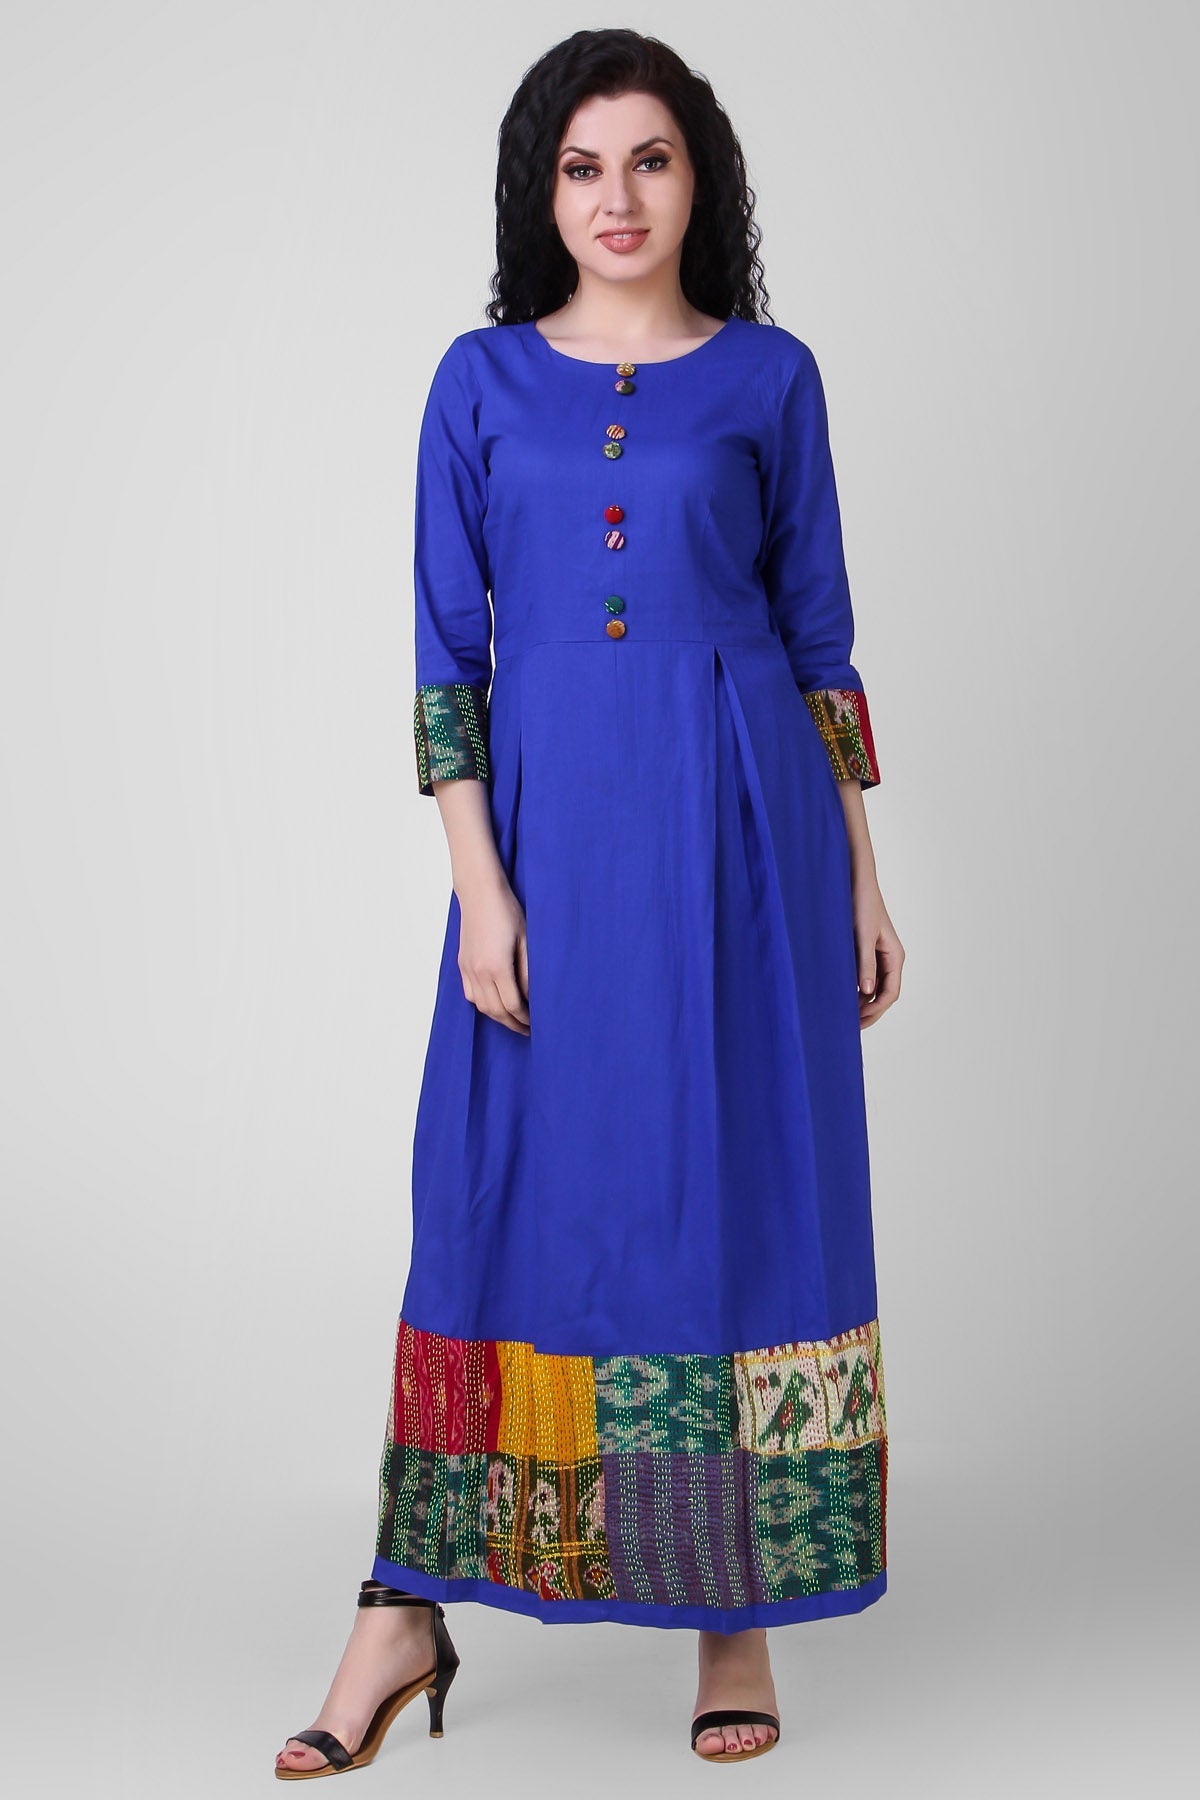 Buy Simply Kitsch Blue Dress for Women online available at ScrollnShops